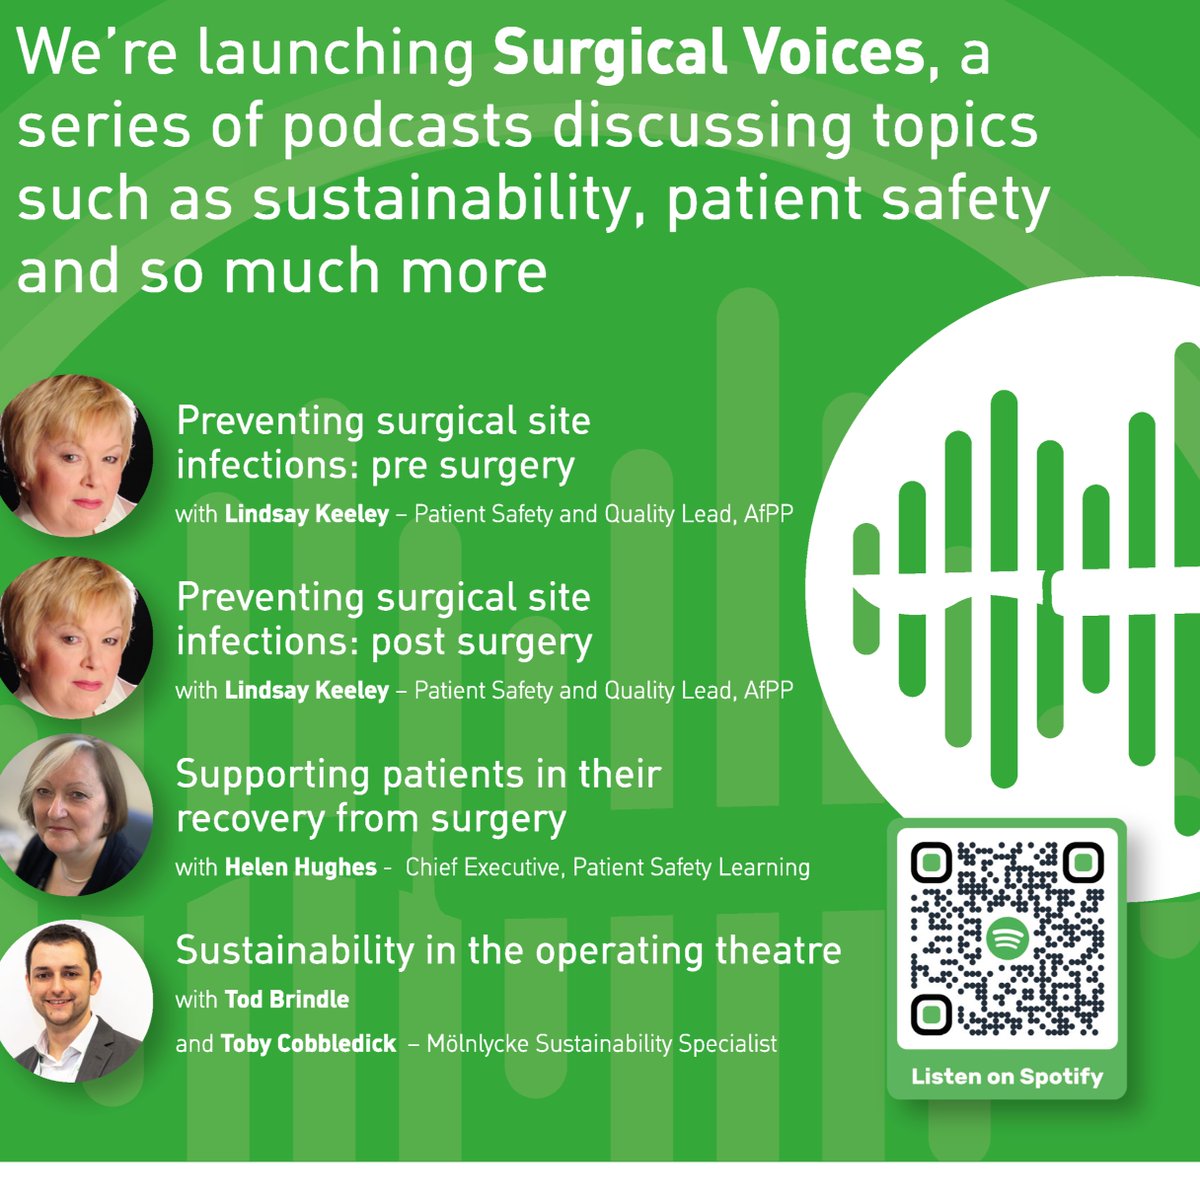 If you find yourself with a moment to spare today, immerse yourself in the captivating 'Surgical Voices' series, our latest podcast adventure! Scan the QR code to take a listen! spoti.fi/3ZcHjfT #SupportingPatients #SurgicalVoices #PreventingSSIs #PatientSafetyLearning